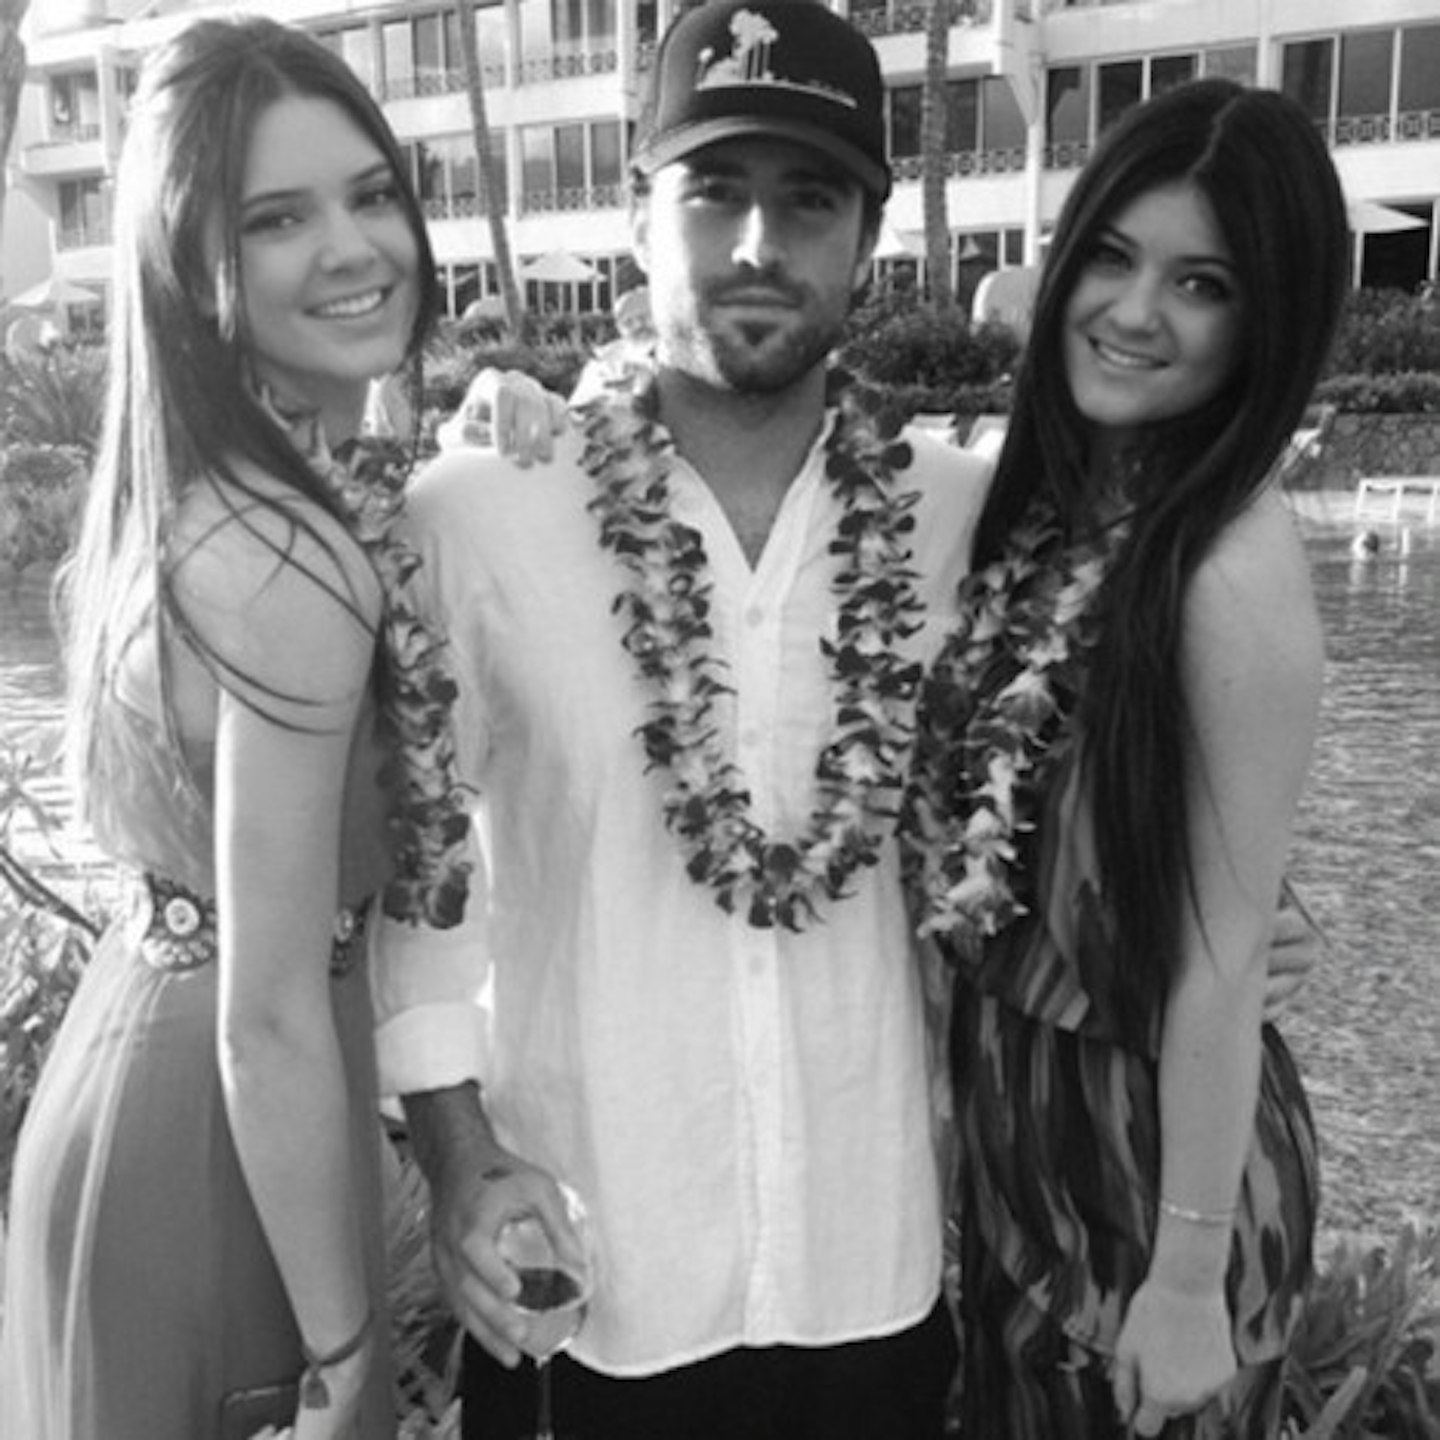 Brody previously admitted to being jealous of Kendall and Kylie's relationship with their father